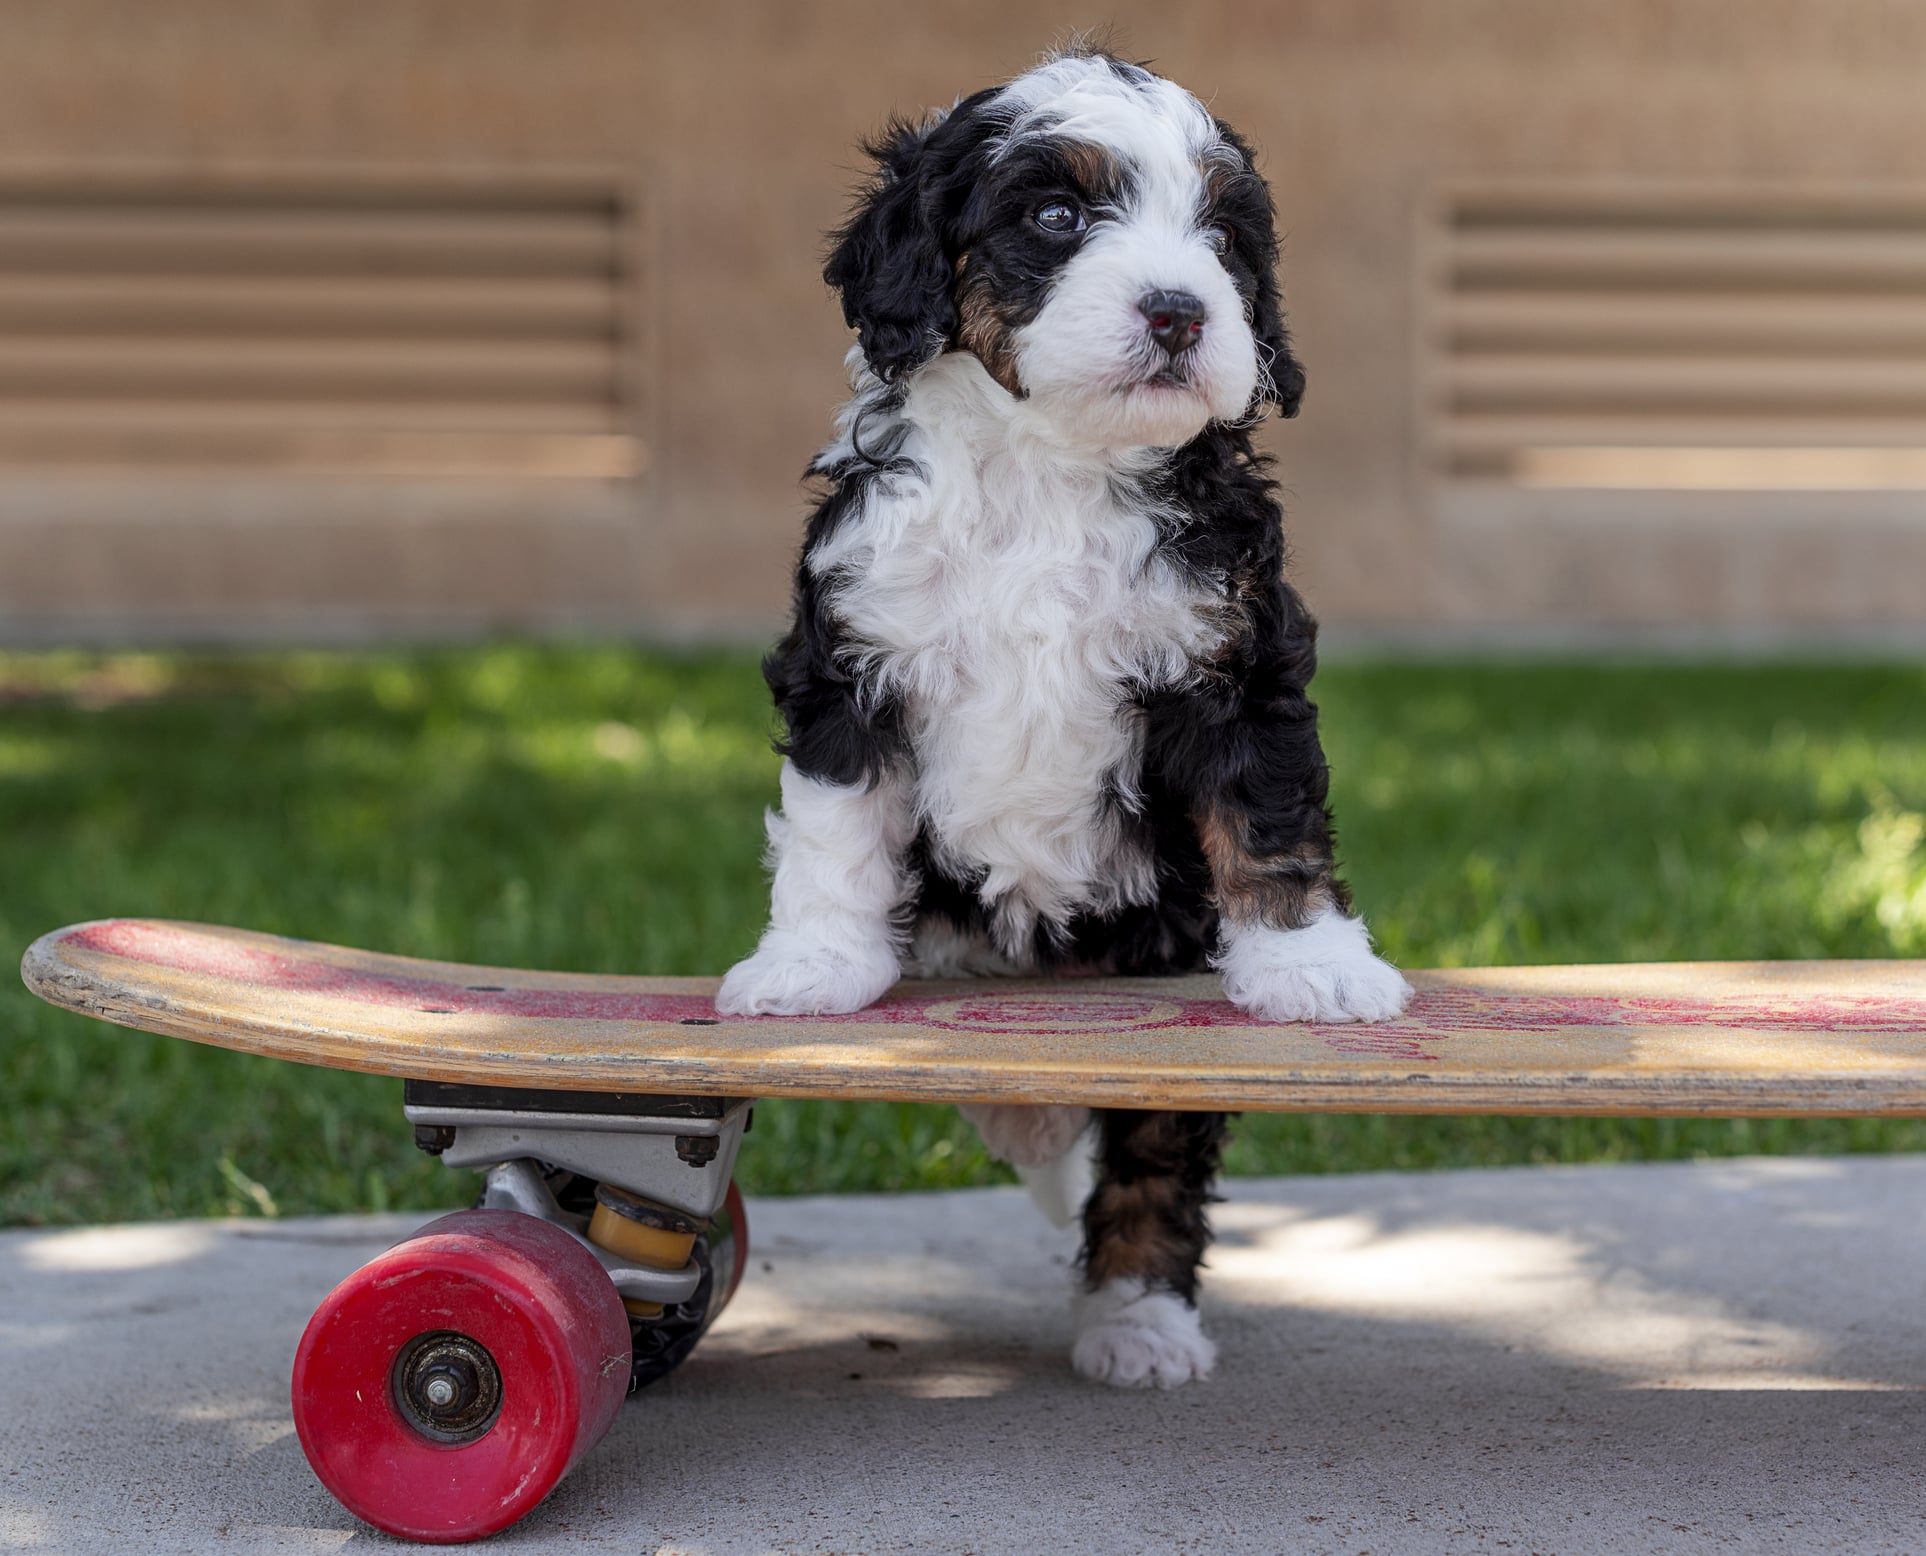 Bernedoodle Puppy Climbs on a Skate Board